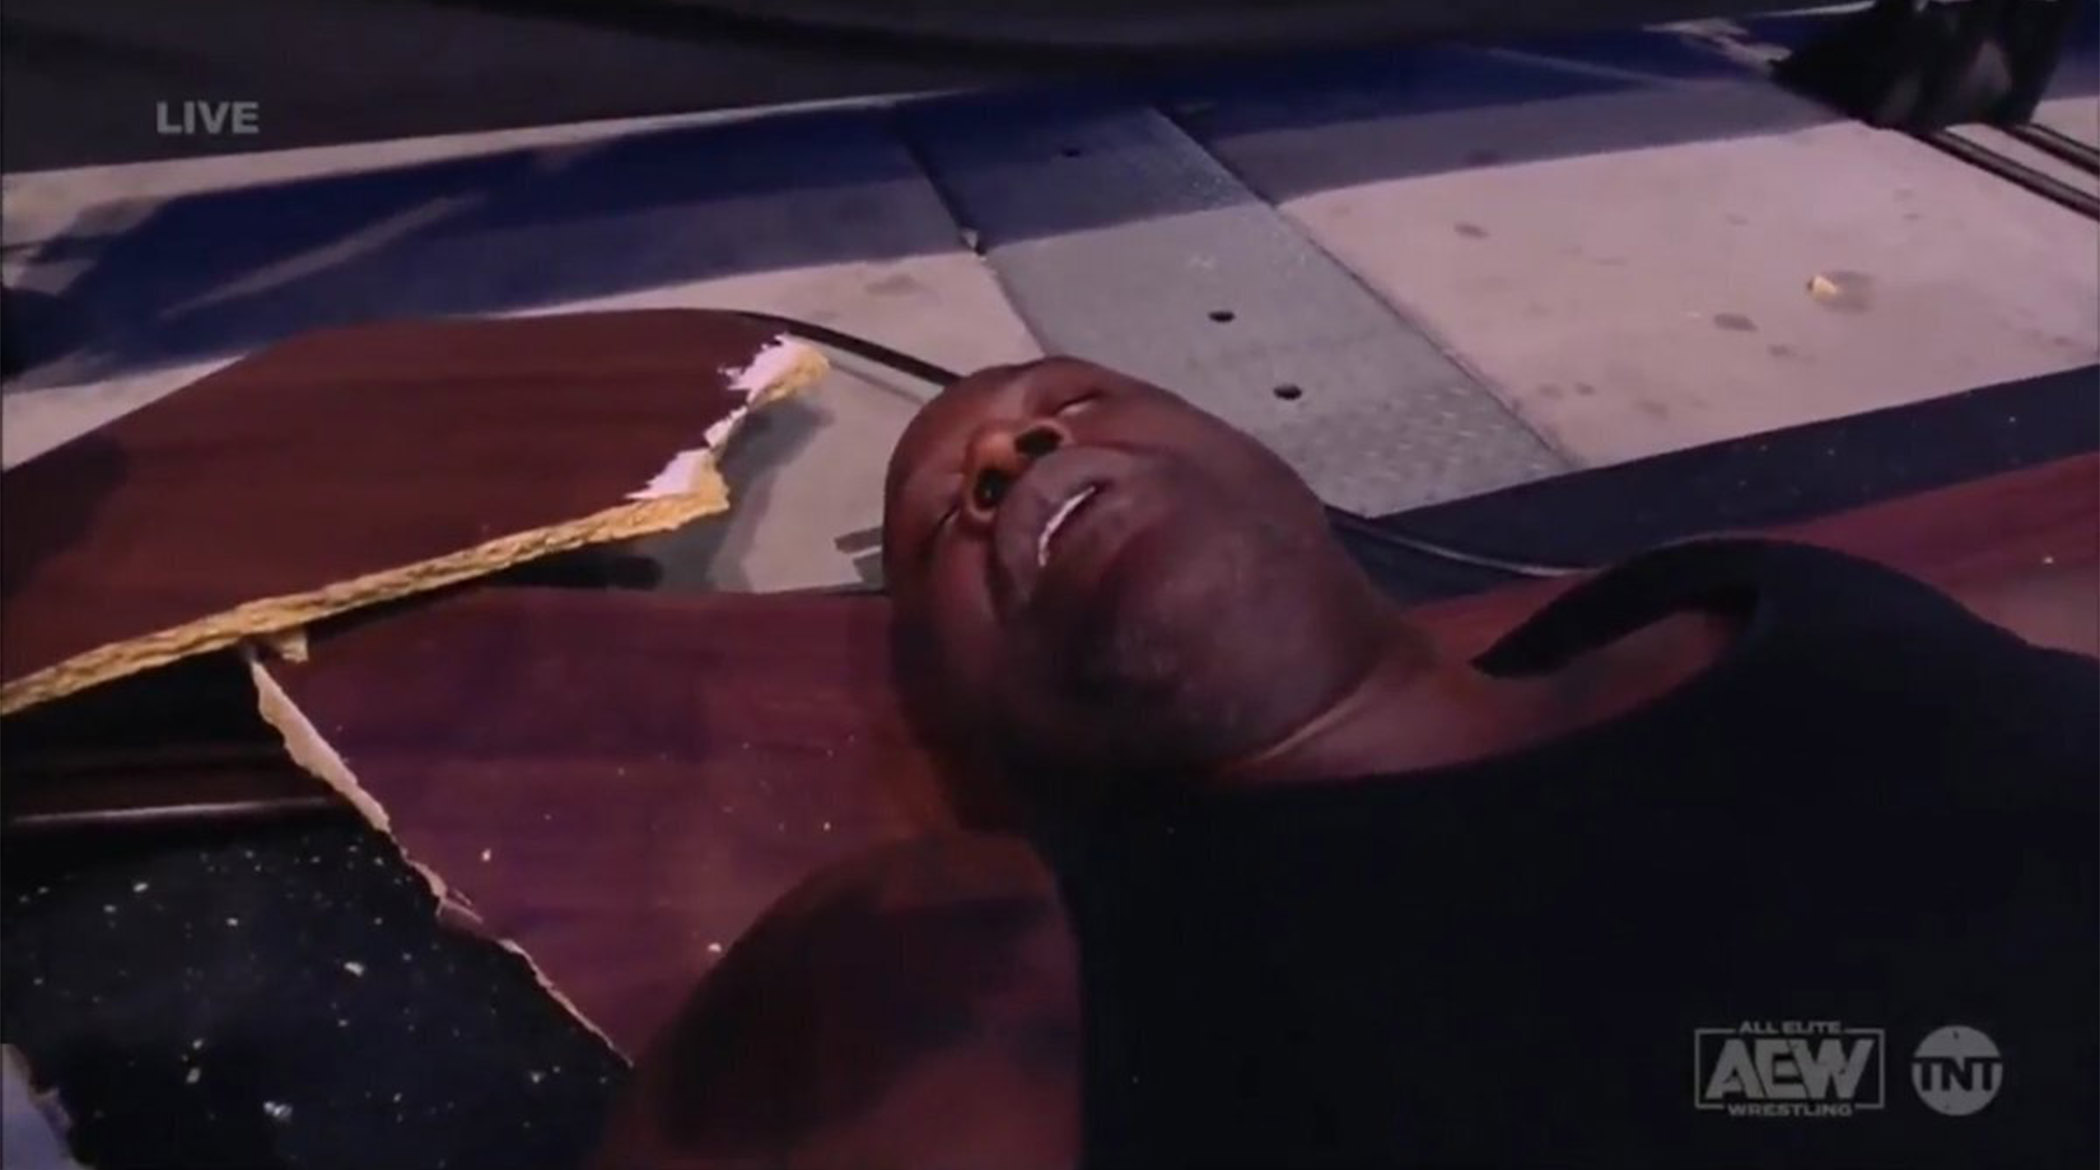 Shaq is eliminated in the debut of AEW Dynamite